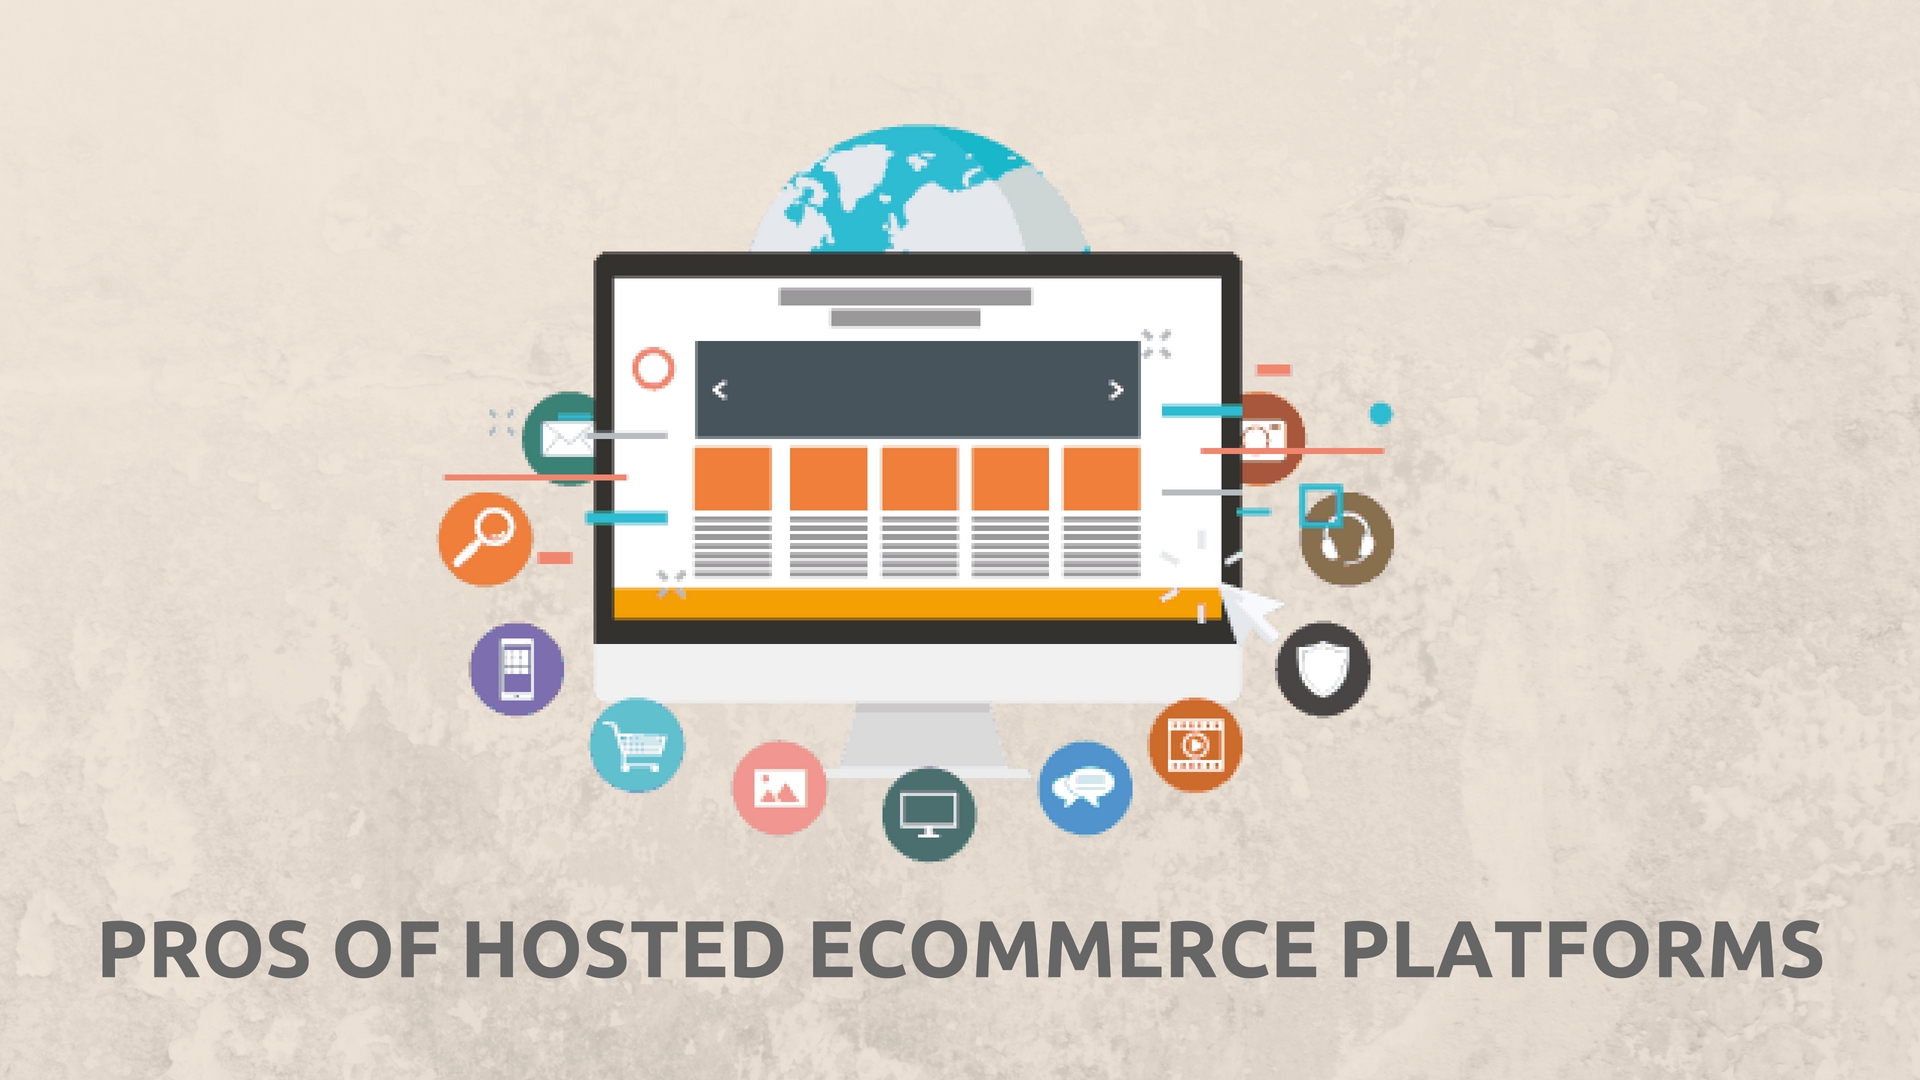 Pros of hosted eCommerce platforms